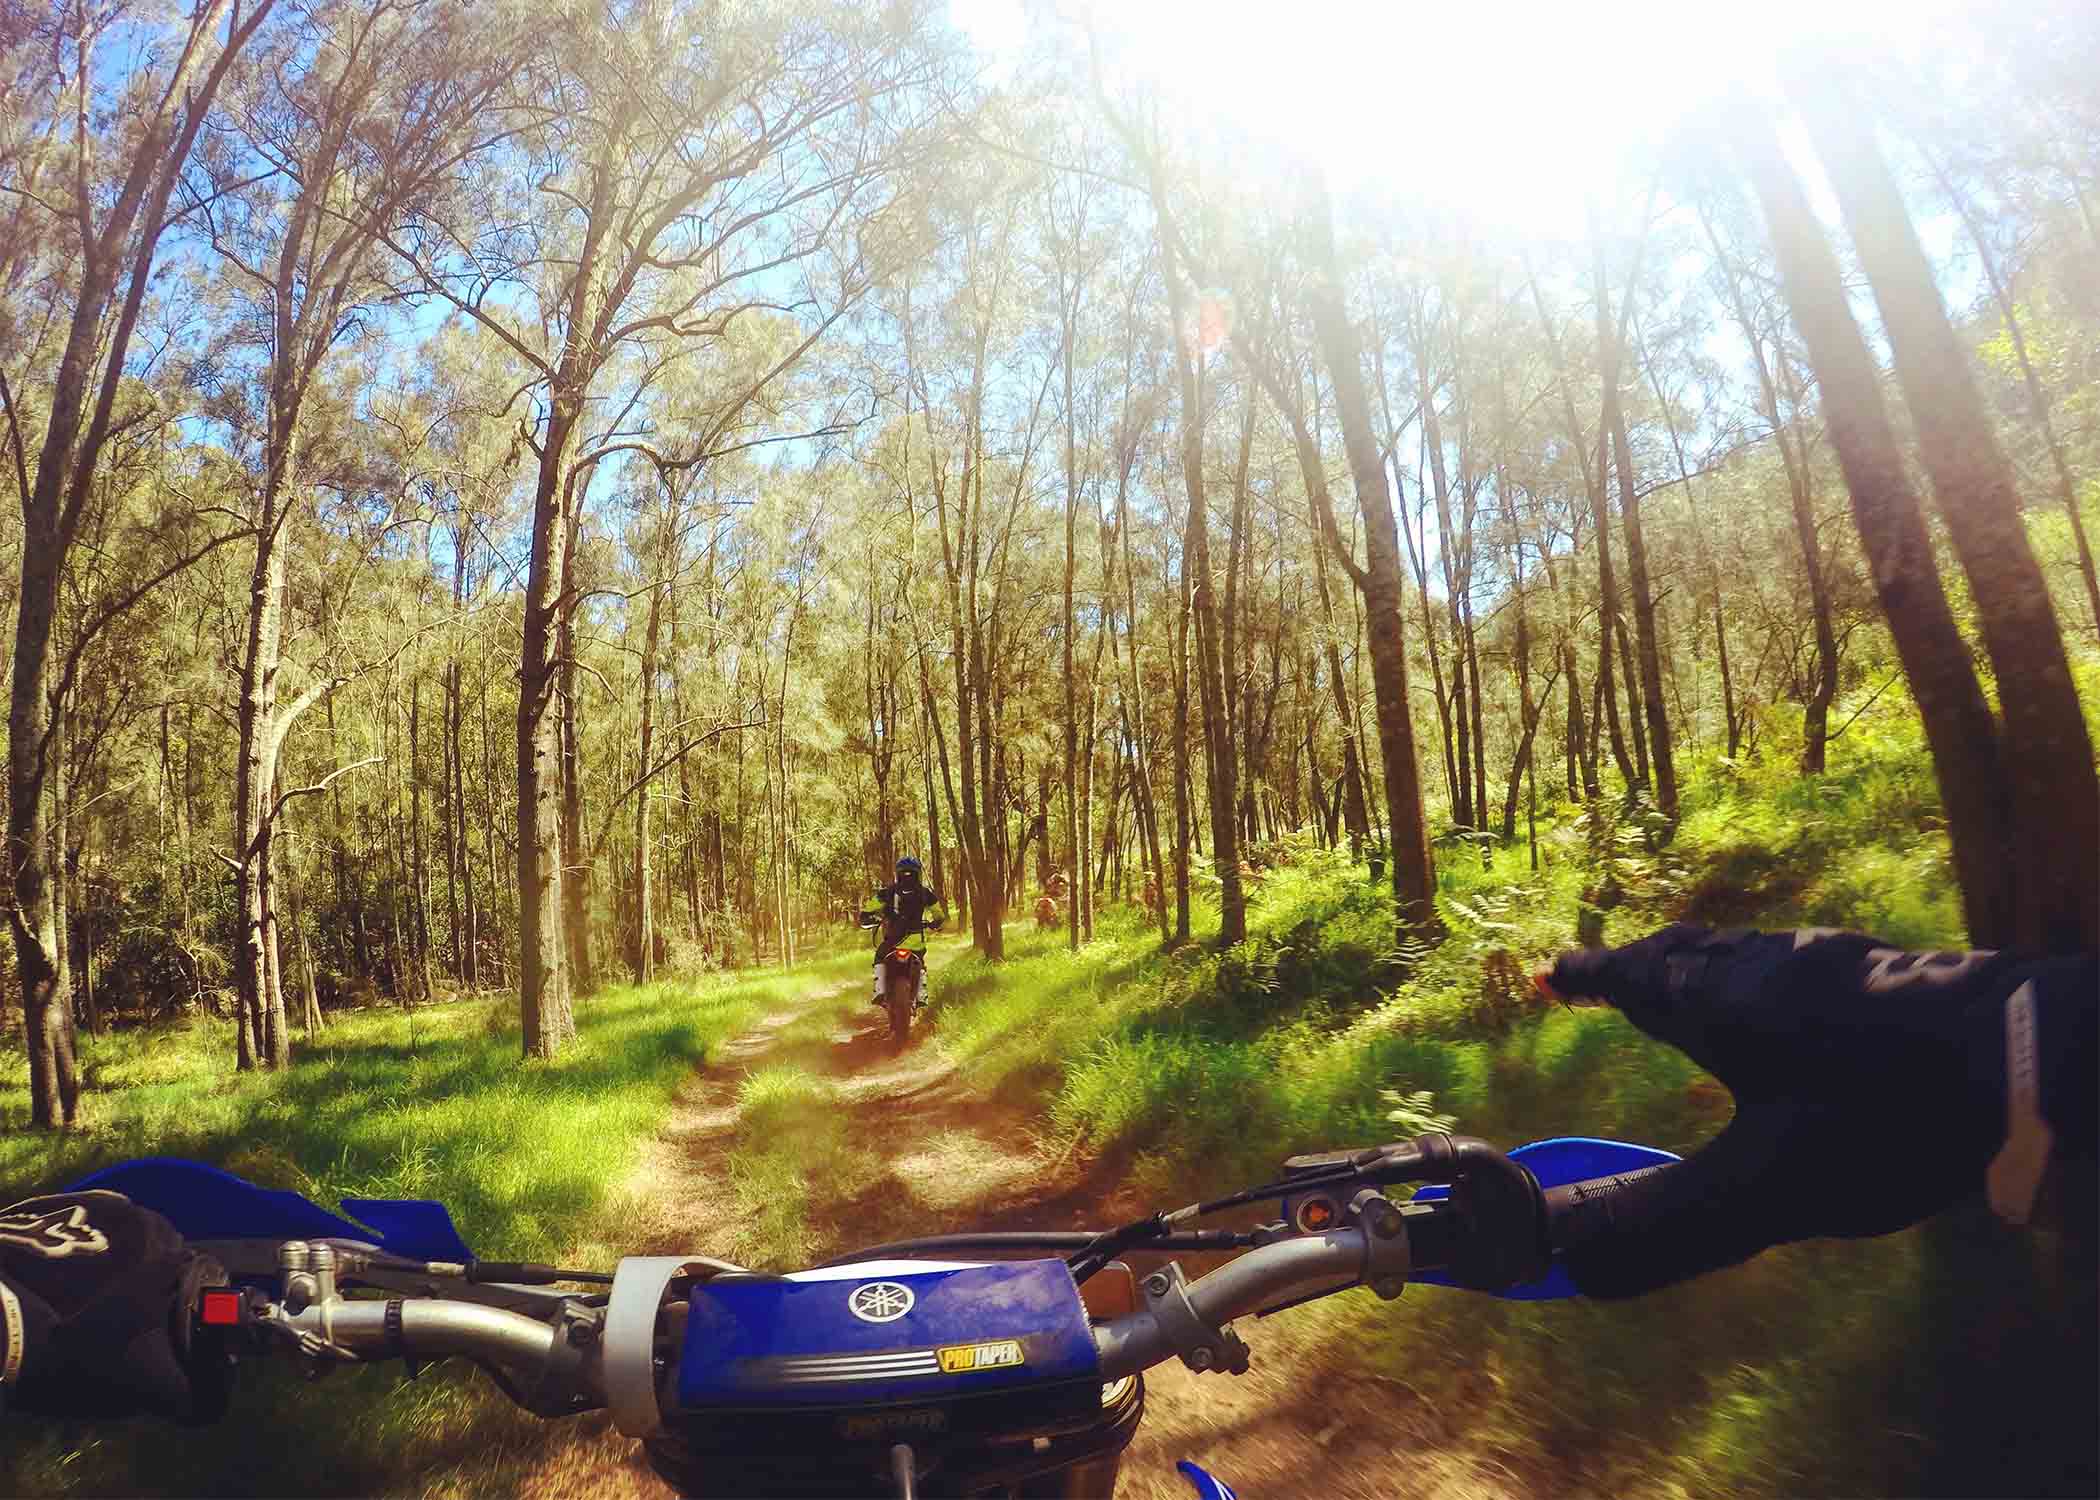 Dirt bikes in the woods